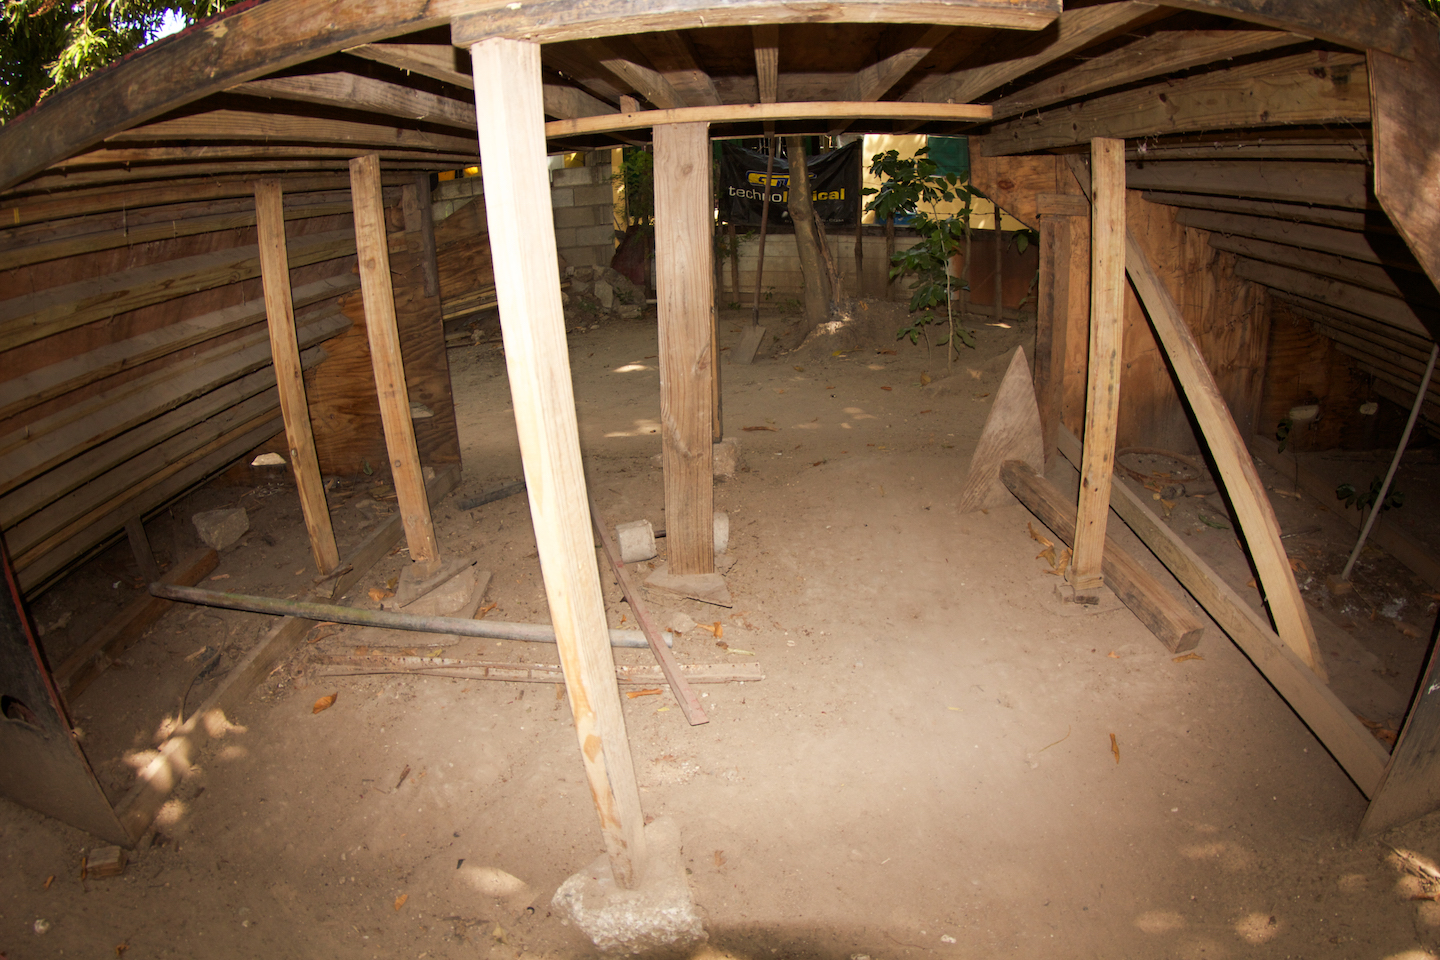 A photo of the wooden joists holding up a DIY ramp for BMX riders.